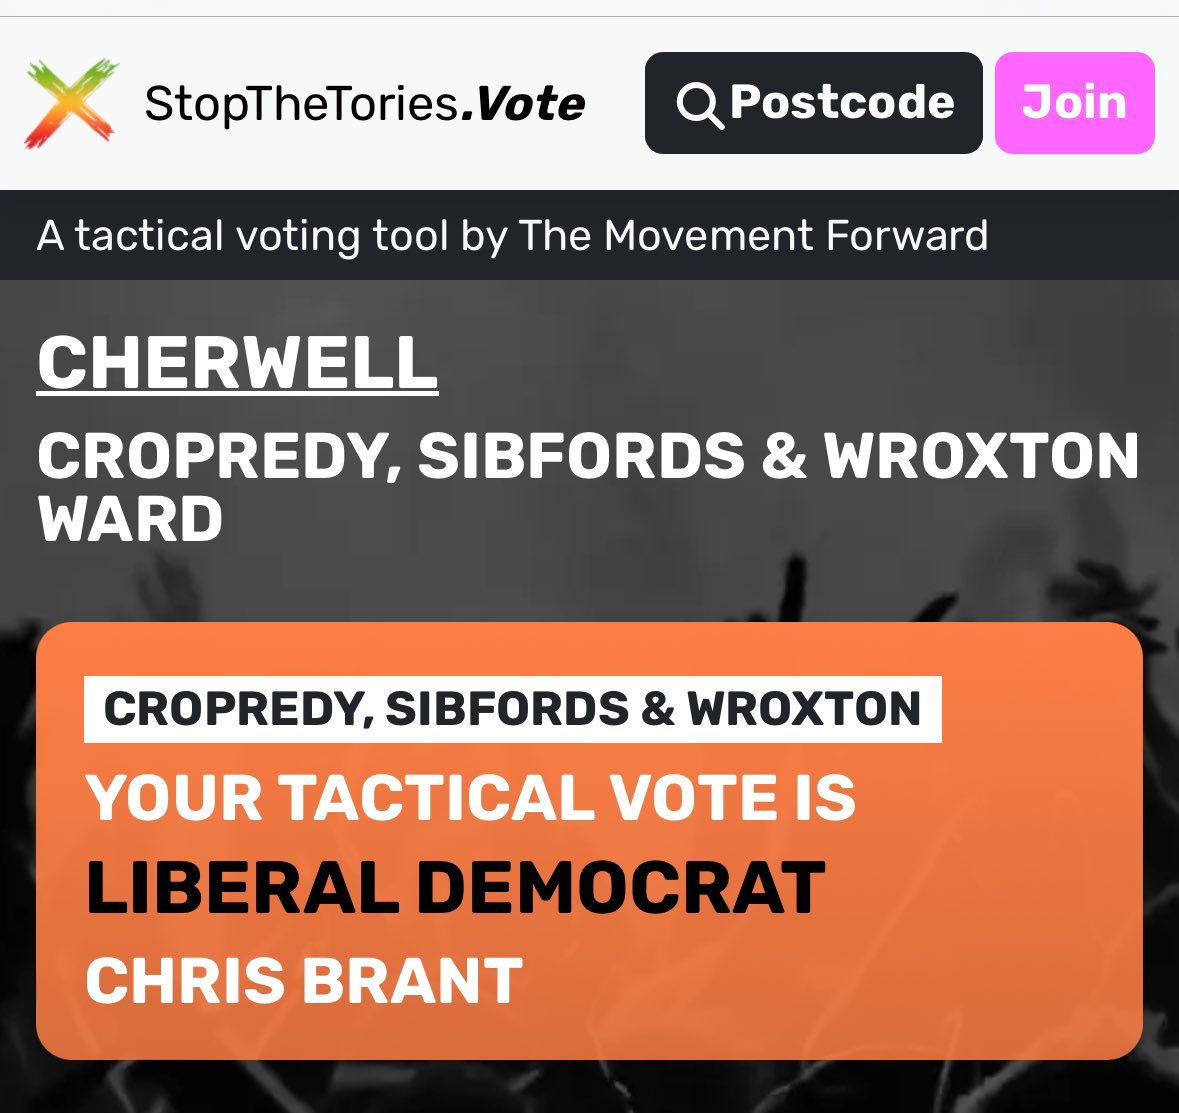 If you want to stop the Tories then use tactical voting!!! It works! Check out: 

stopthetories.vote

#Banbury #Wroxton #Oxfordshire 
#Cherwell #sibfords #Cropredy 

@MVTFWD